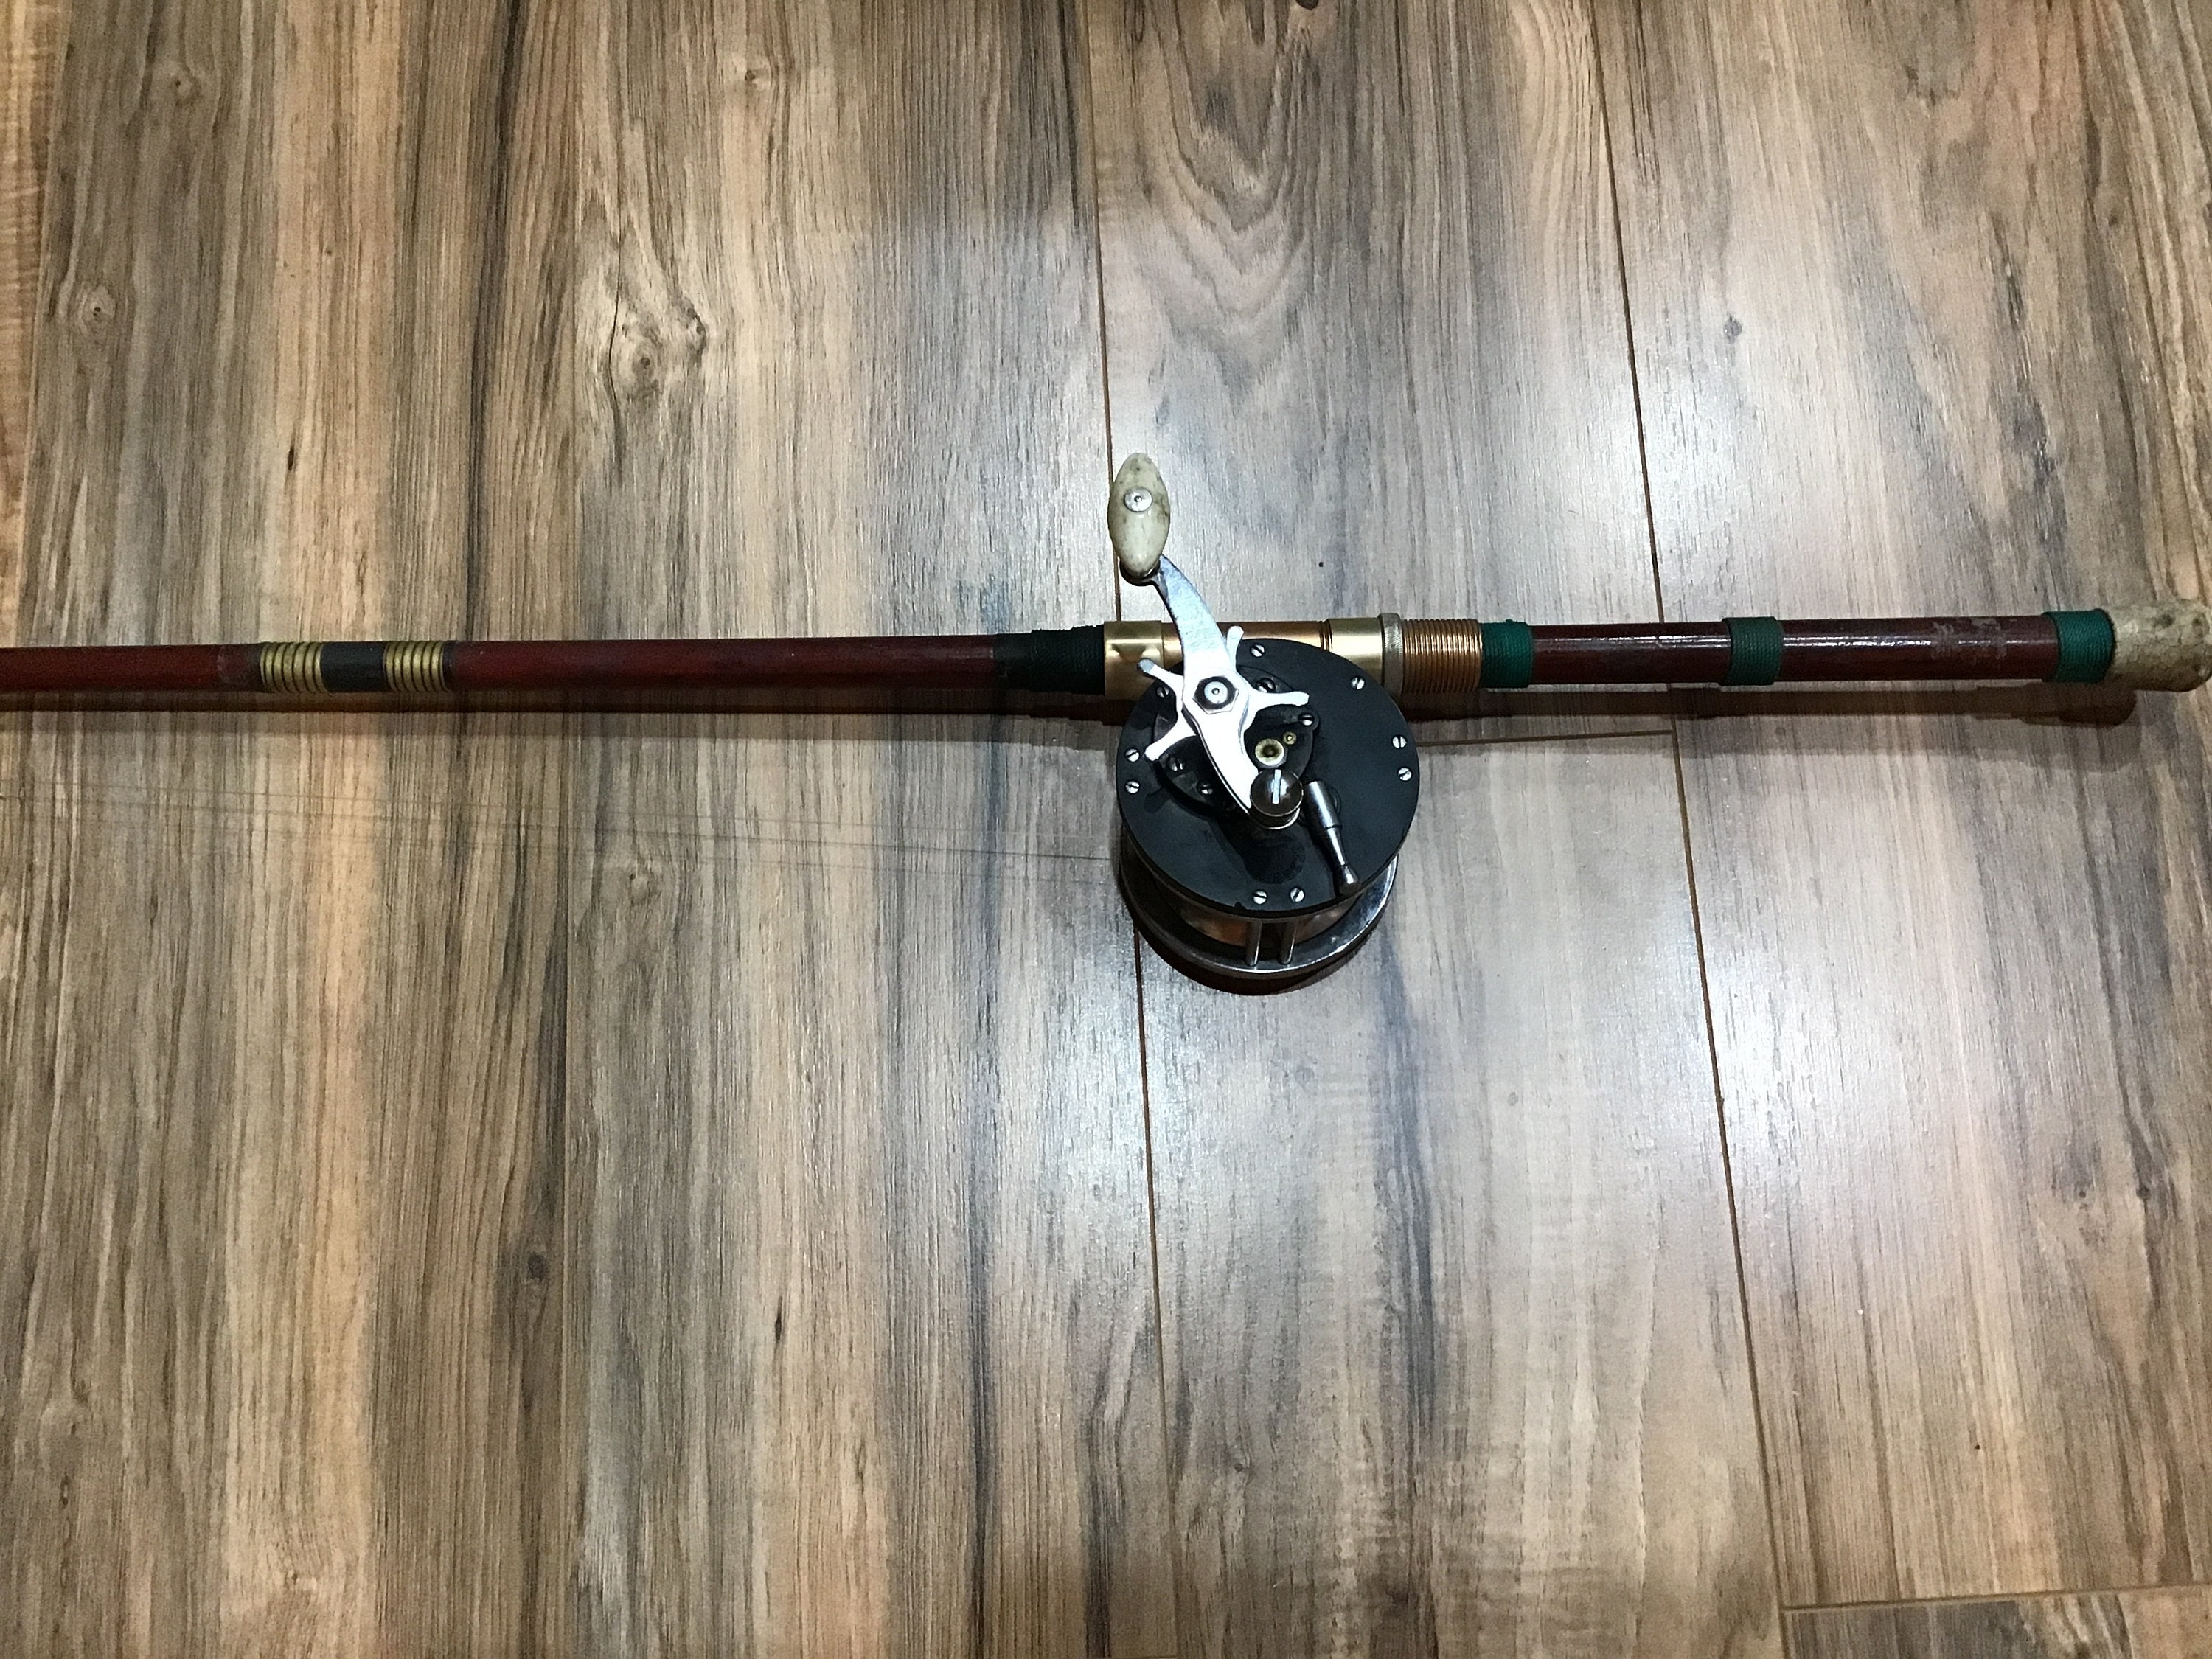 1940s Vintage 7’ Fishing Rod and Ocean City “Seattle” 110 Reel, Offshore,  Ocean Fishing Rod, Coastal, Fishing, Lake Home, Man Cave Decor